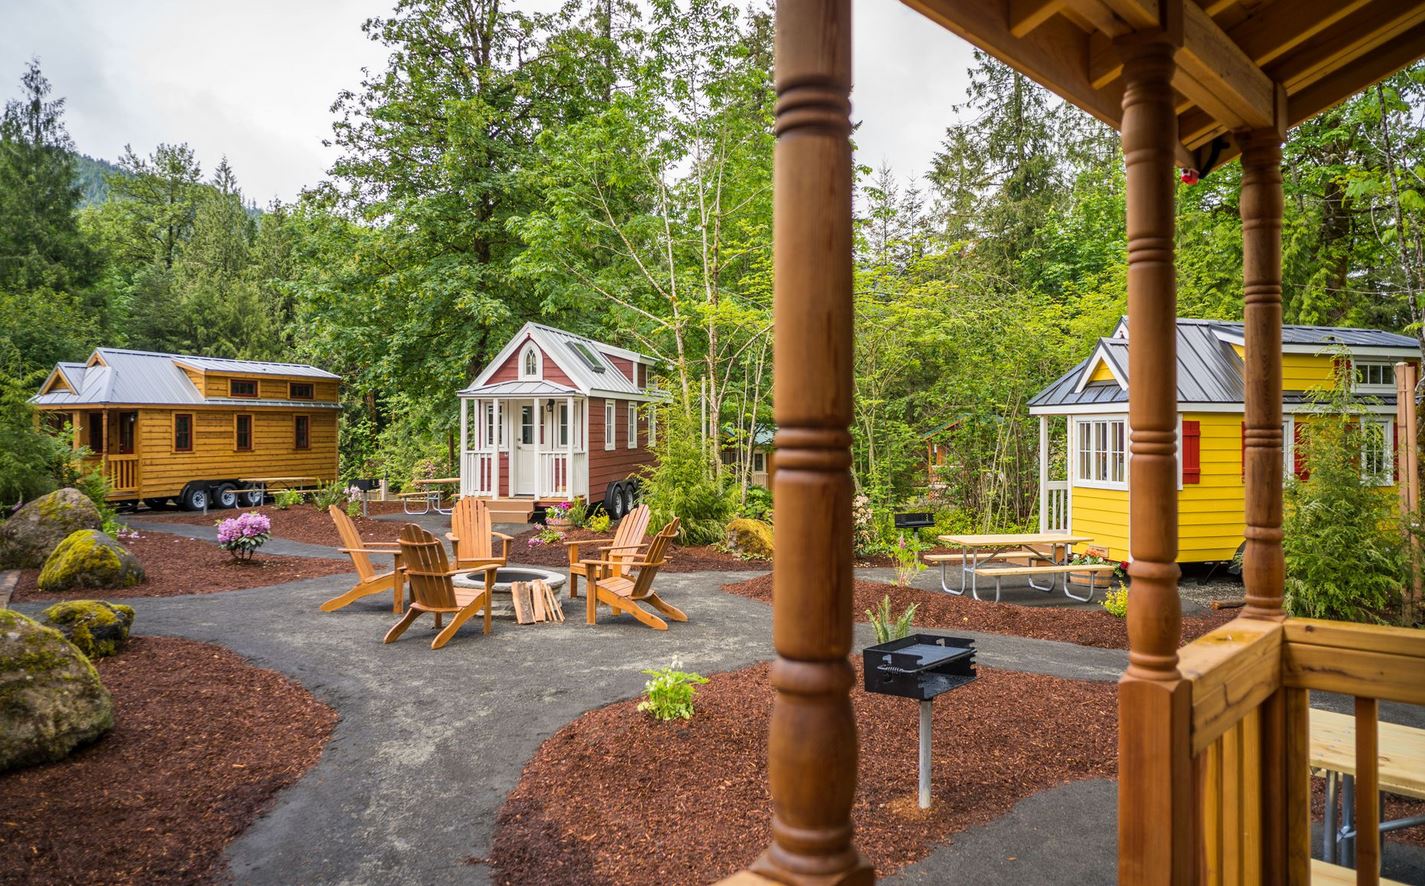 Vacationing in a Tiny House